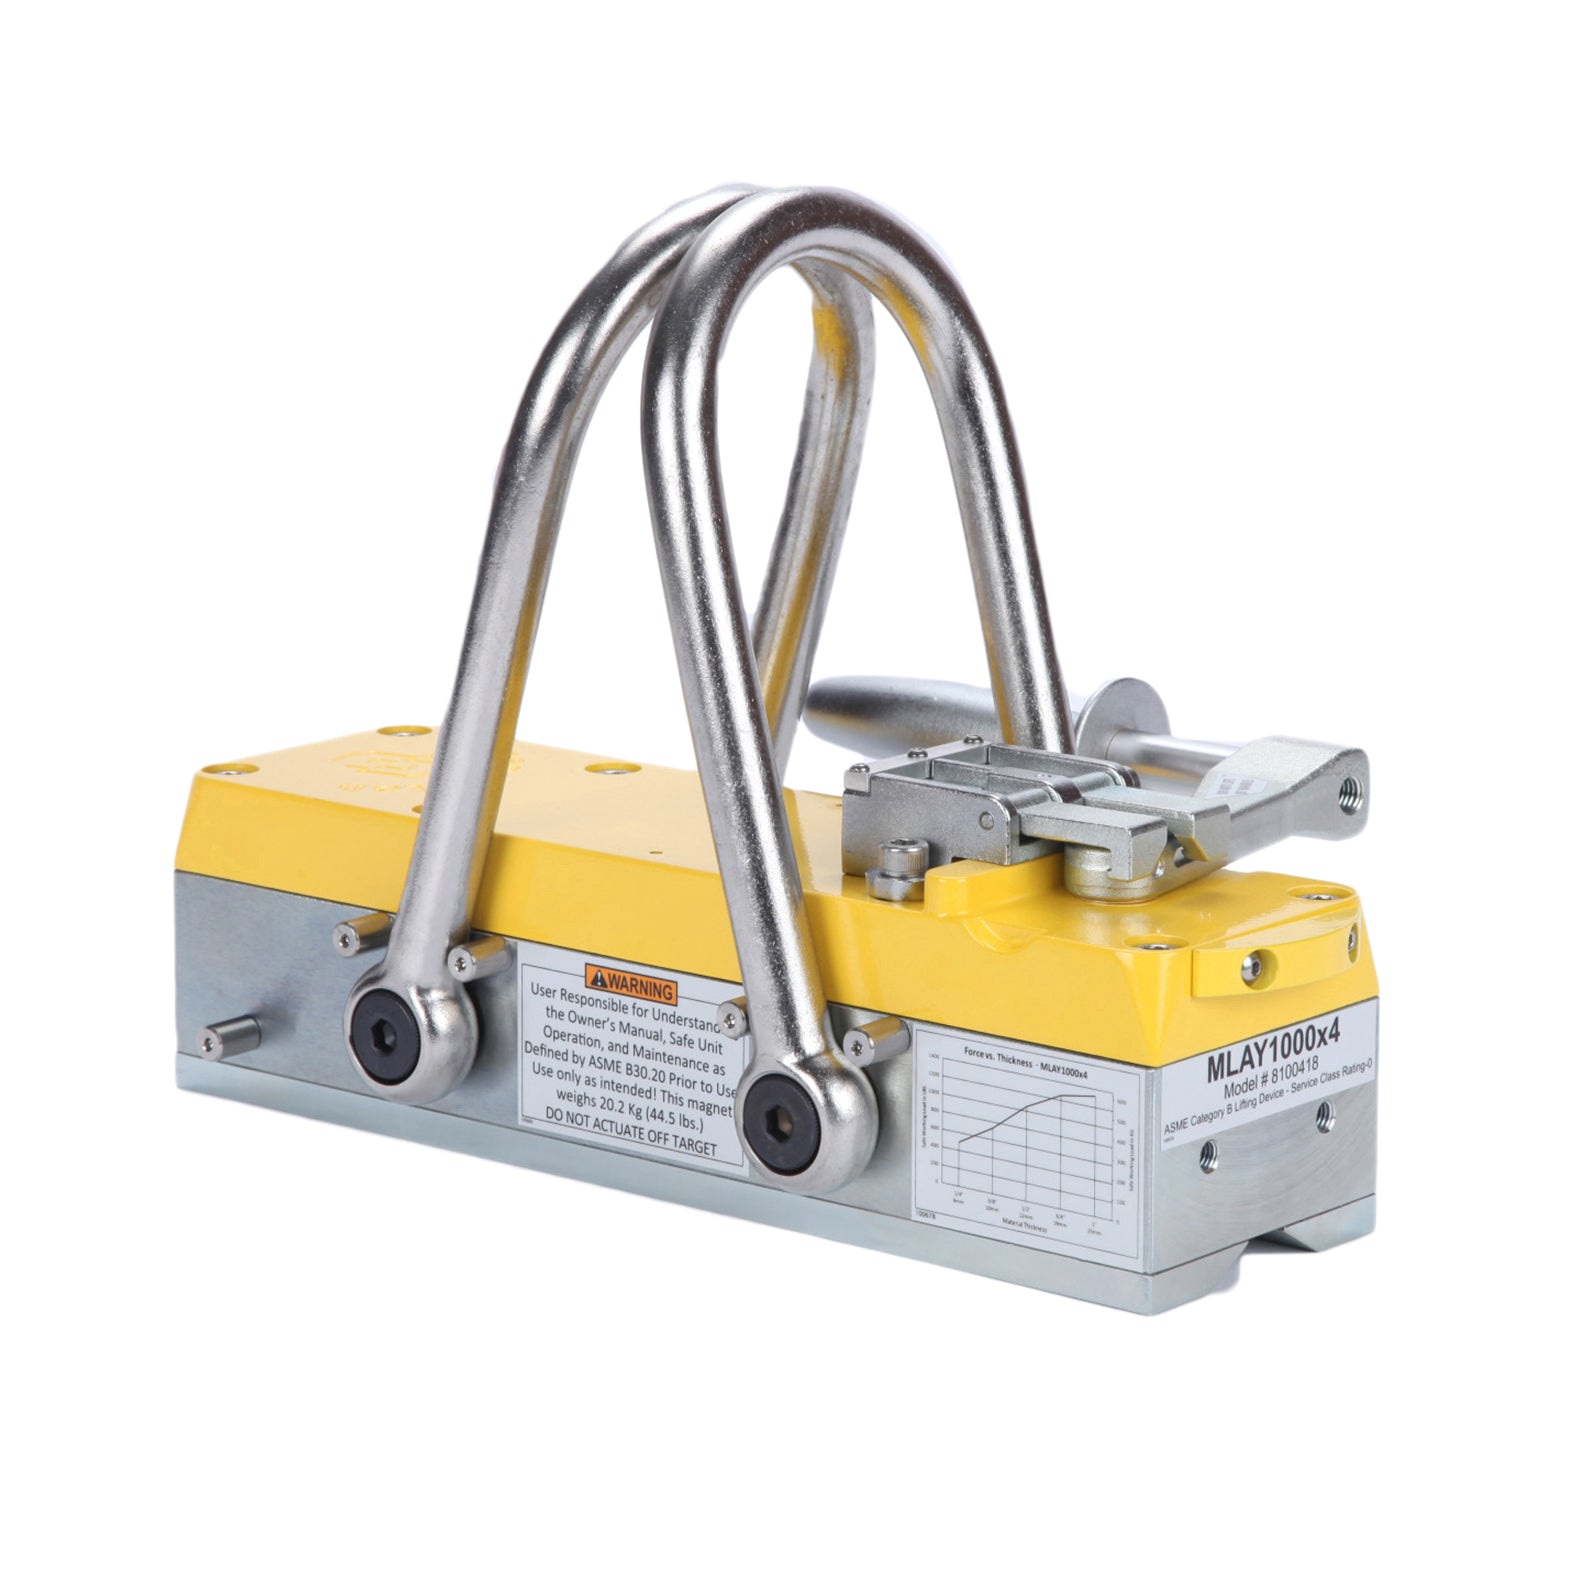  MAG-MATE BL1000 BasicLift Magnet, Durable Welded Stainless  Steel Body, Heavy-Duty Magnets with 2 to-1 Lift Safety for Flat Steel  Surfaces, Lightweight Ceramic Magnets with 1000 lbs. Lifting Capacity :  Industrial 